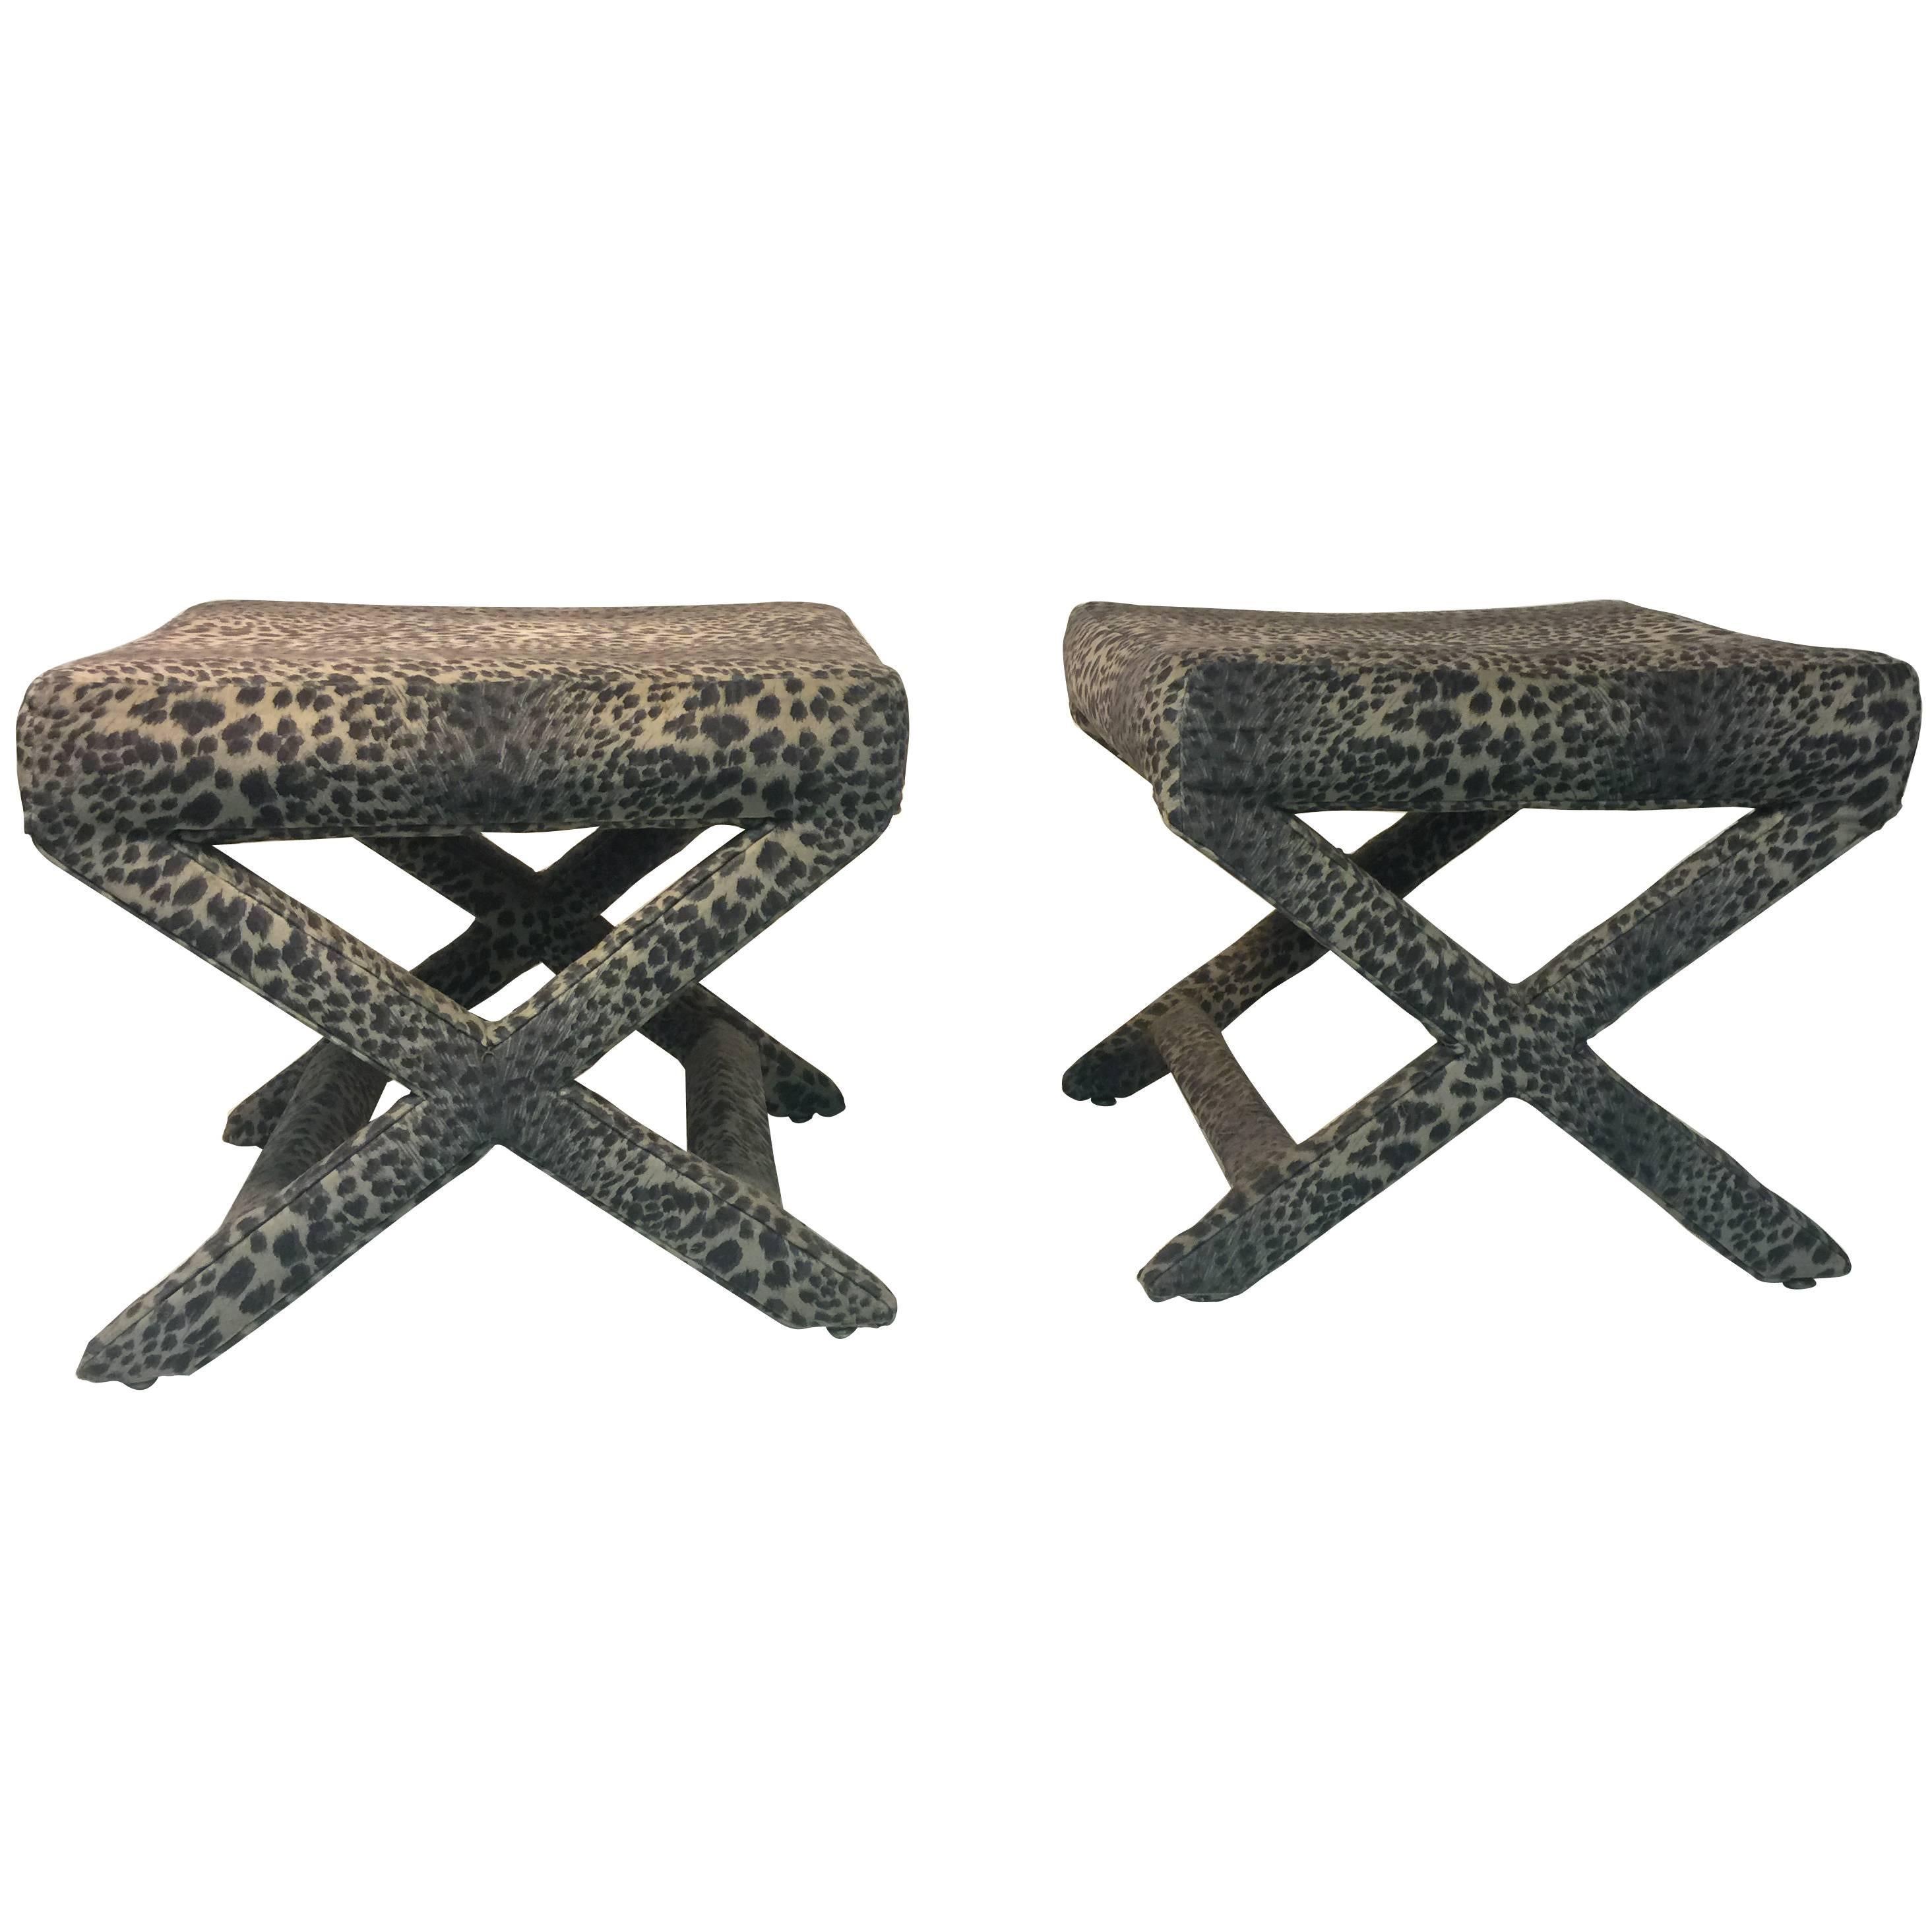 Lovely Pair of Leopard Print X-Base Stools or Benches For Sale